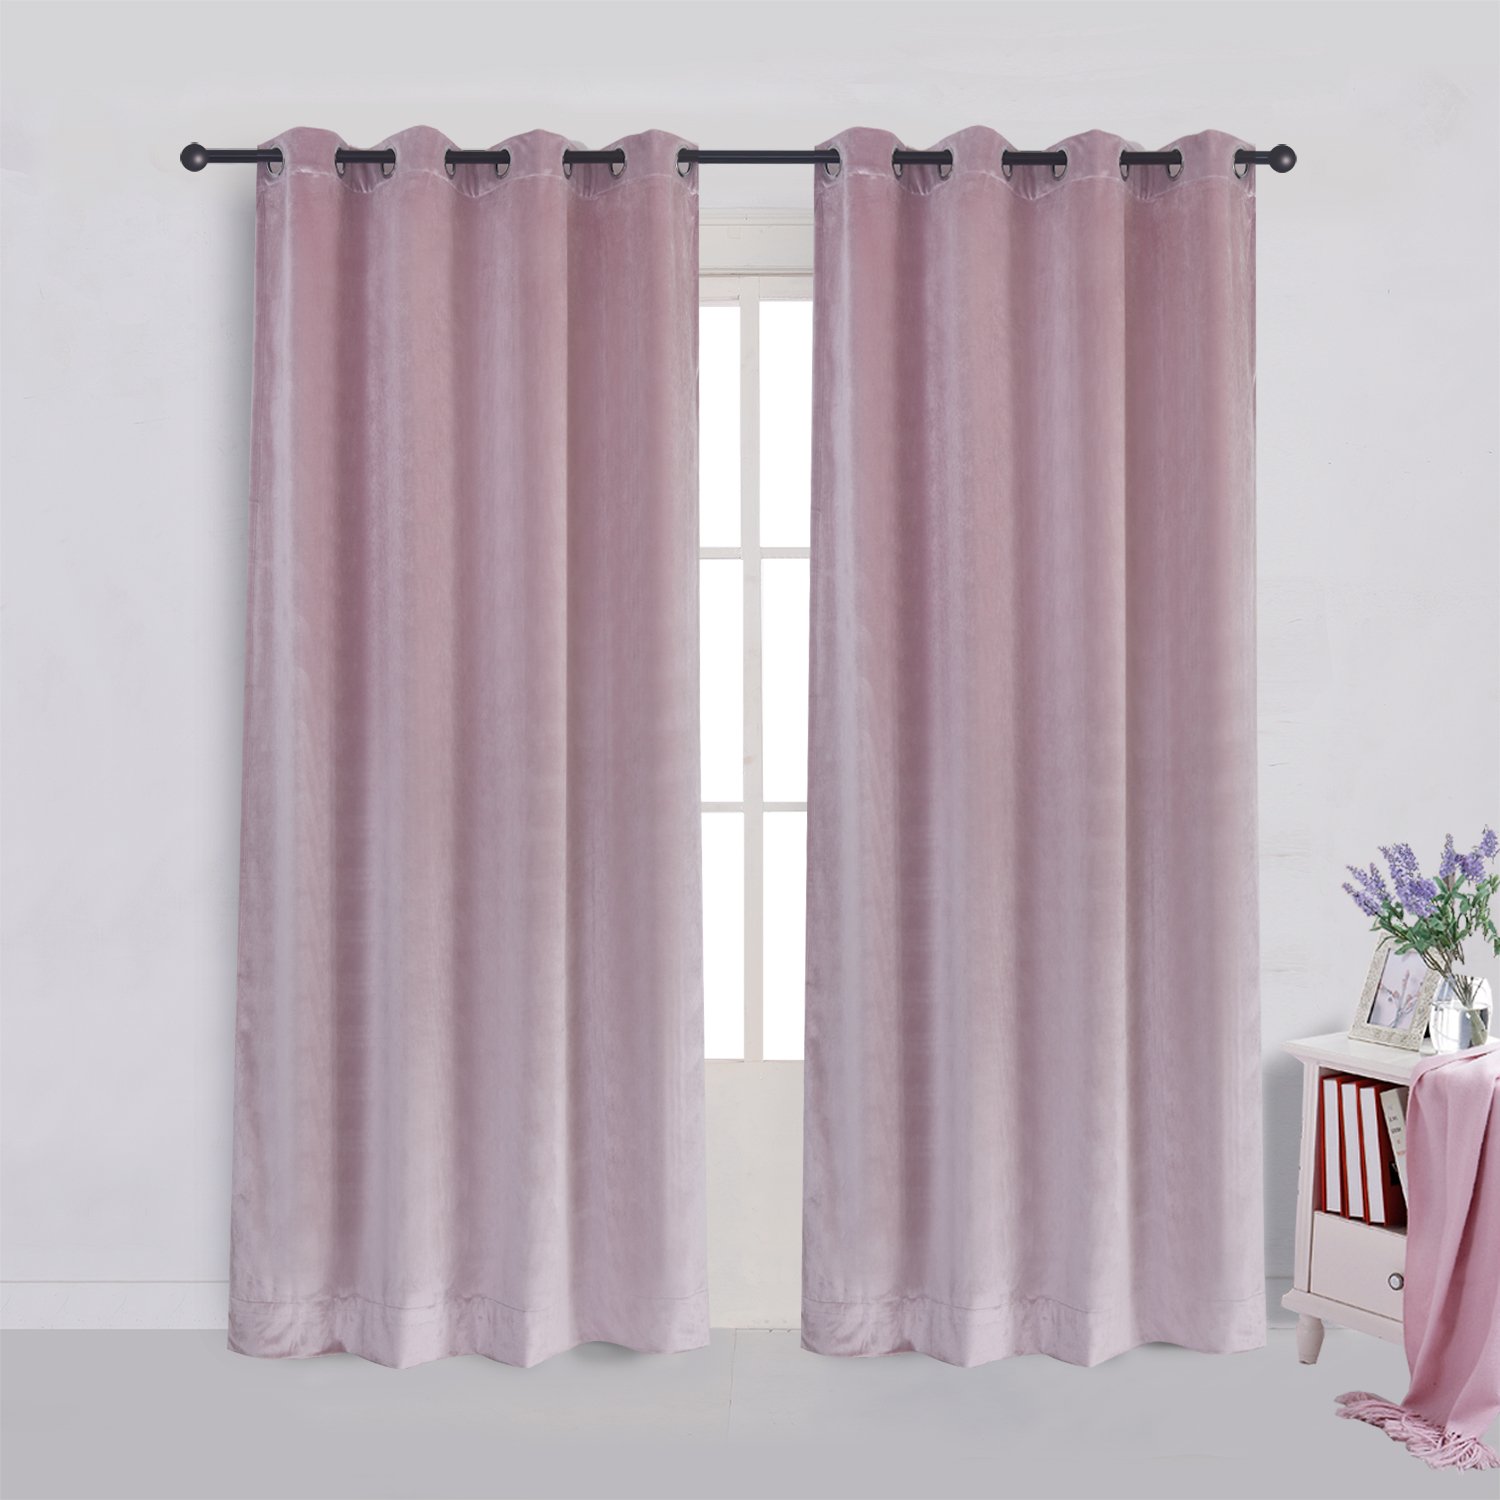 Super Soft Luxury Velvet Curtains Set of 2 Pink Flannel Blackout Drapes Grommet Draperies Eyelet 52Wx120L inch (2 Panels) with Tiebacks